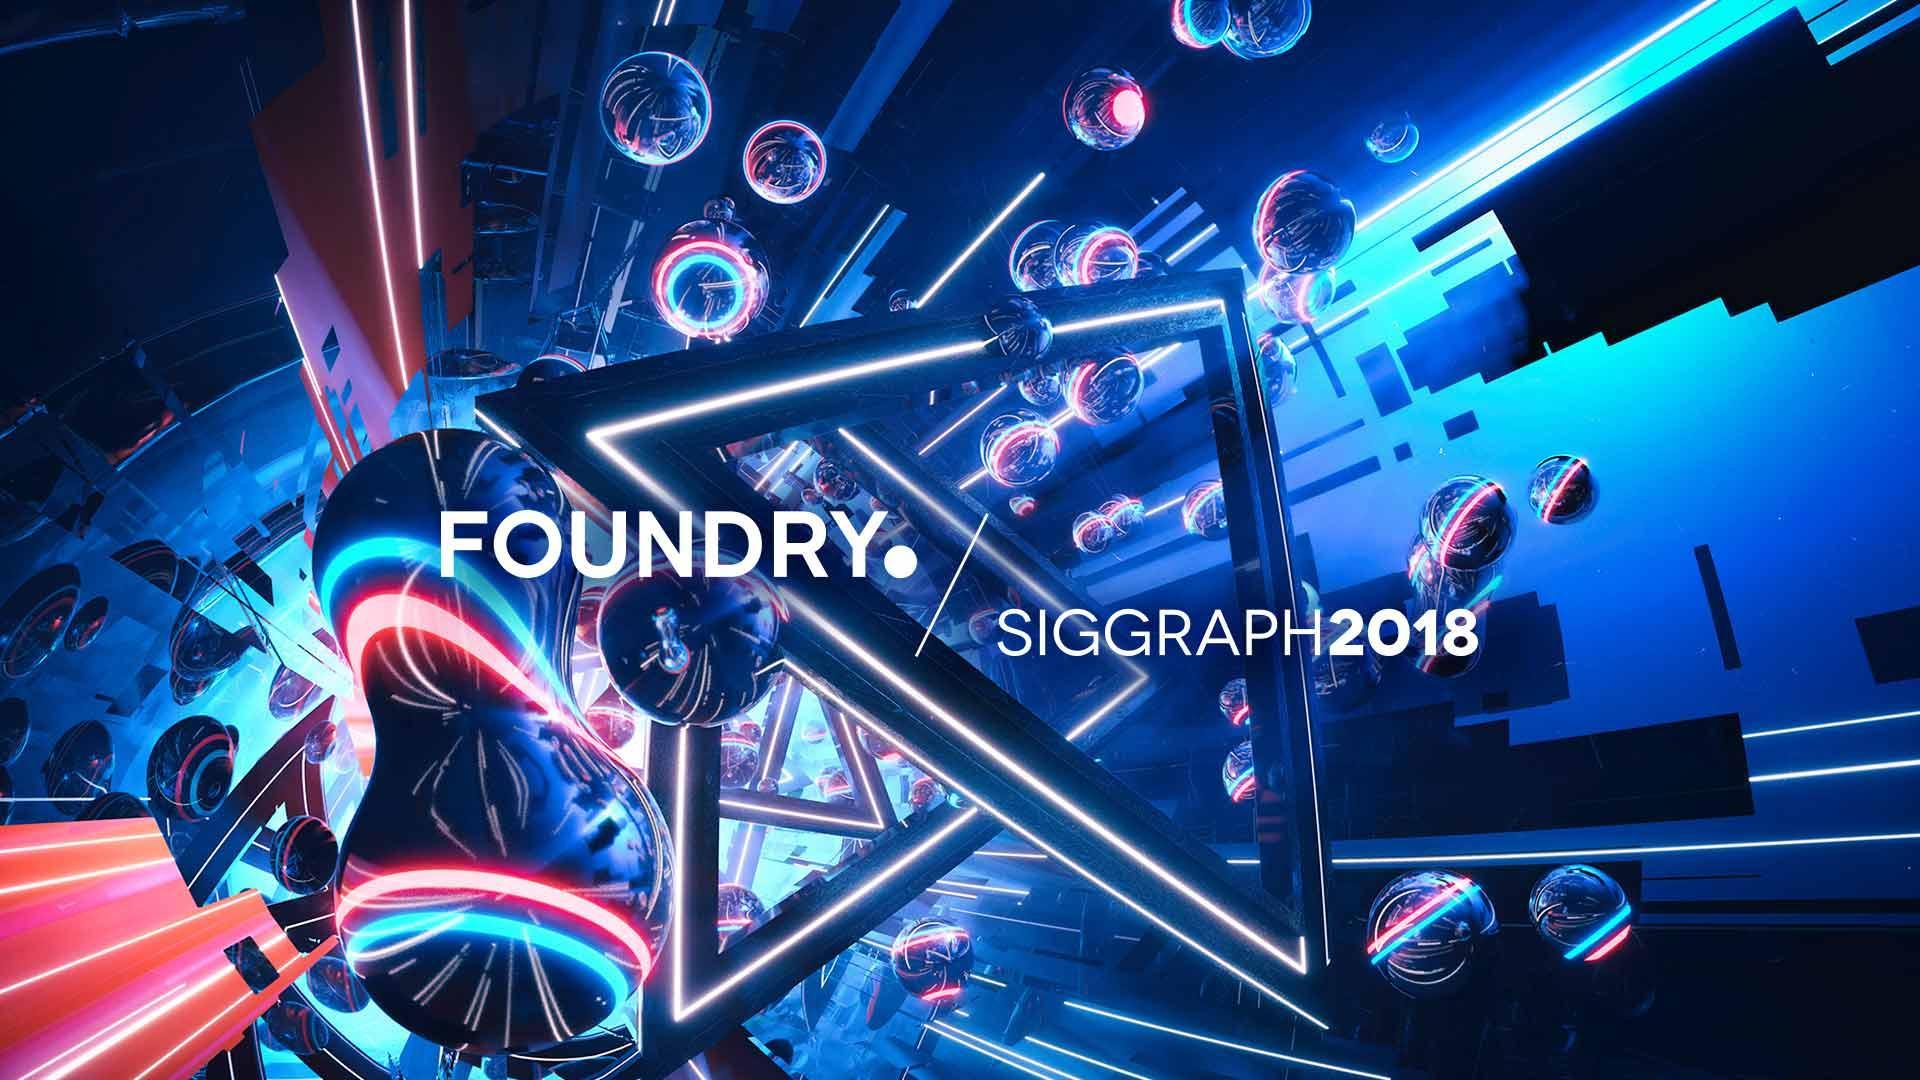 Foundry at Siggraph 